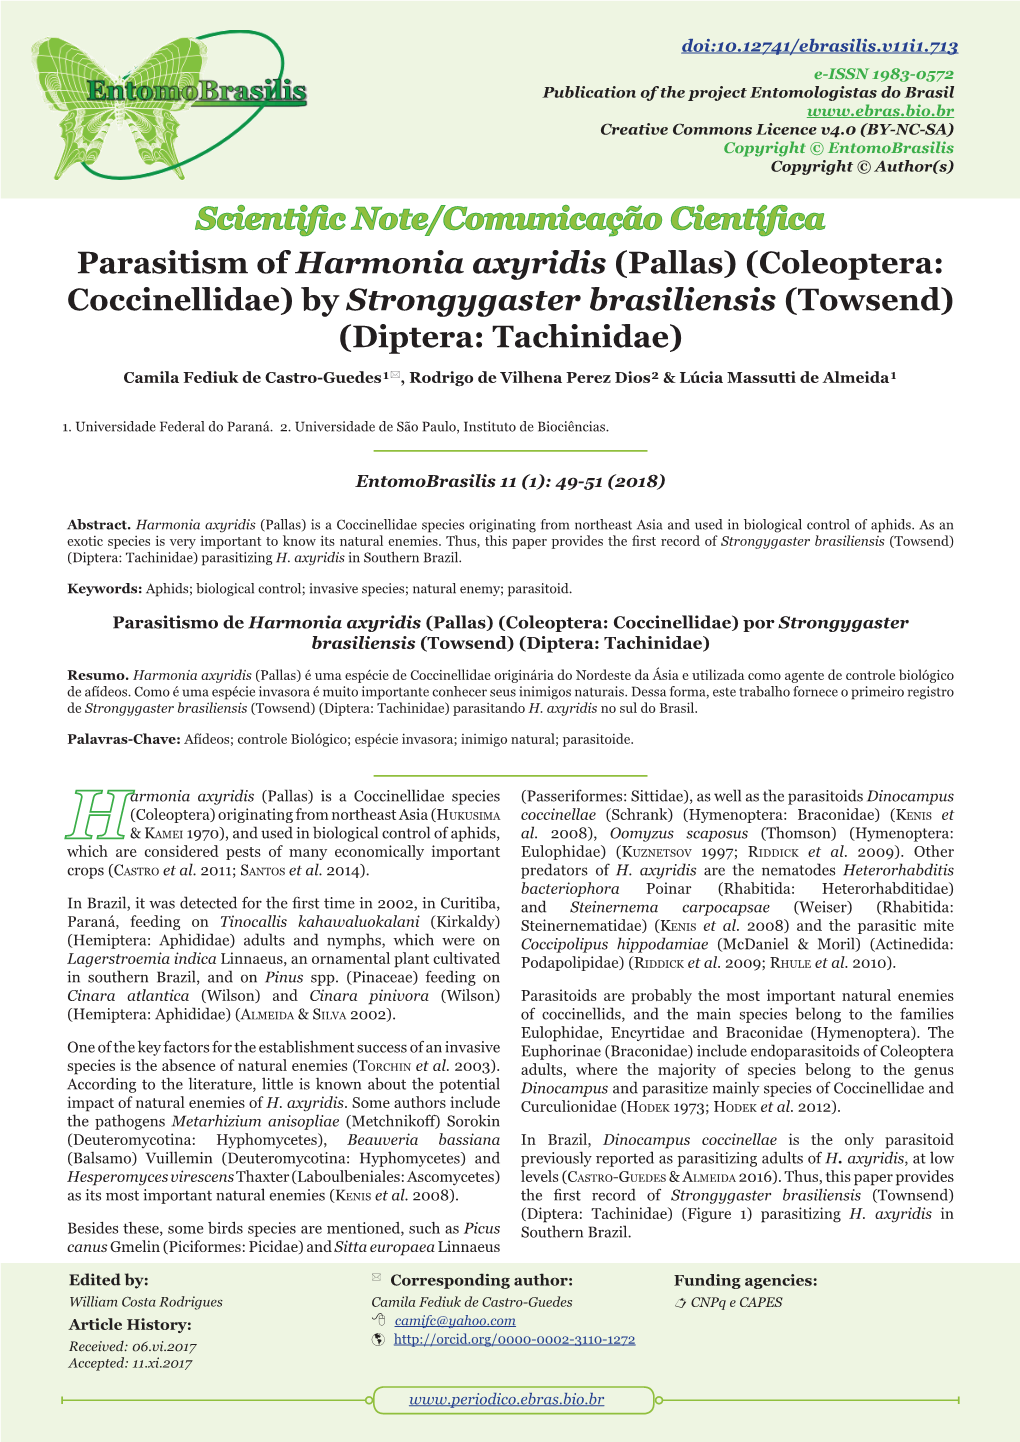 Parasitism of Harmonia Axyridis (Pallas) (Coleoptera: Coccinellidae) by Strongygaster Brasiliensis (Towsend) (Diptera: Tachinidae)